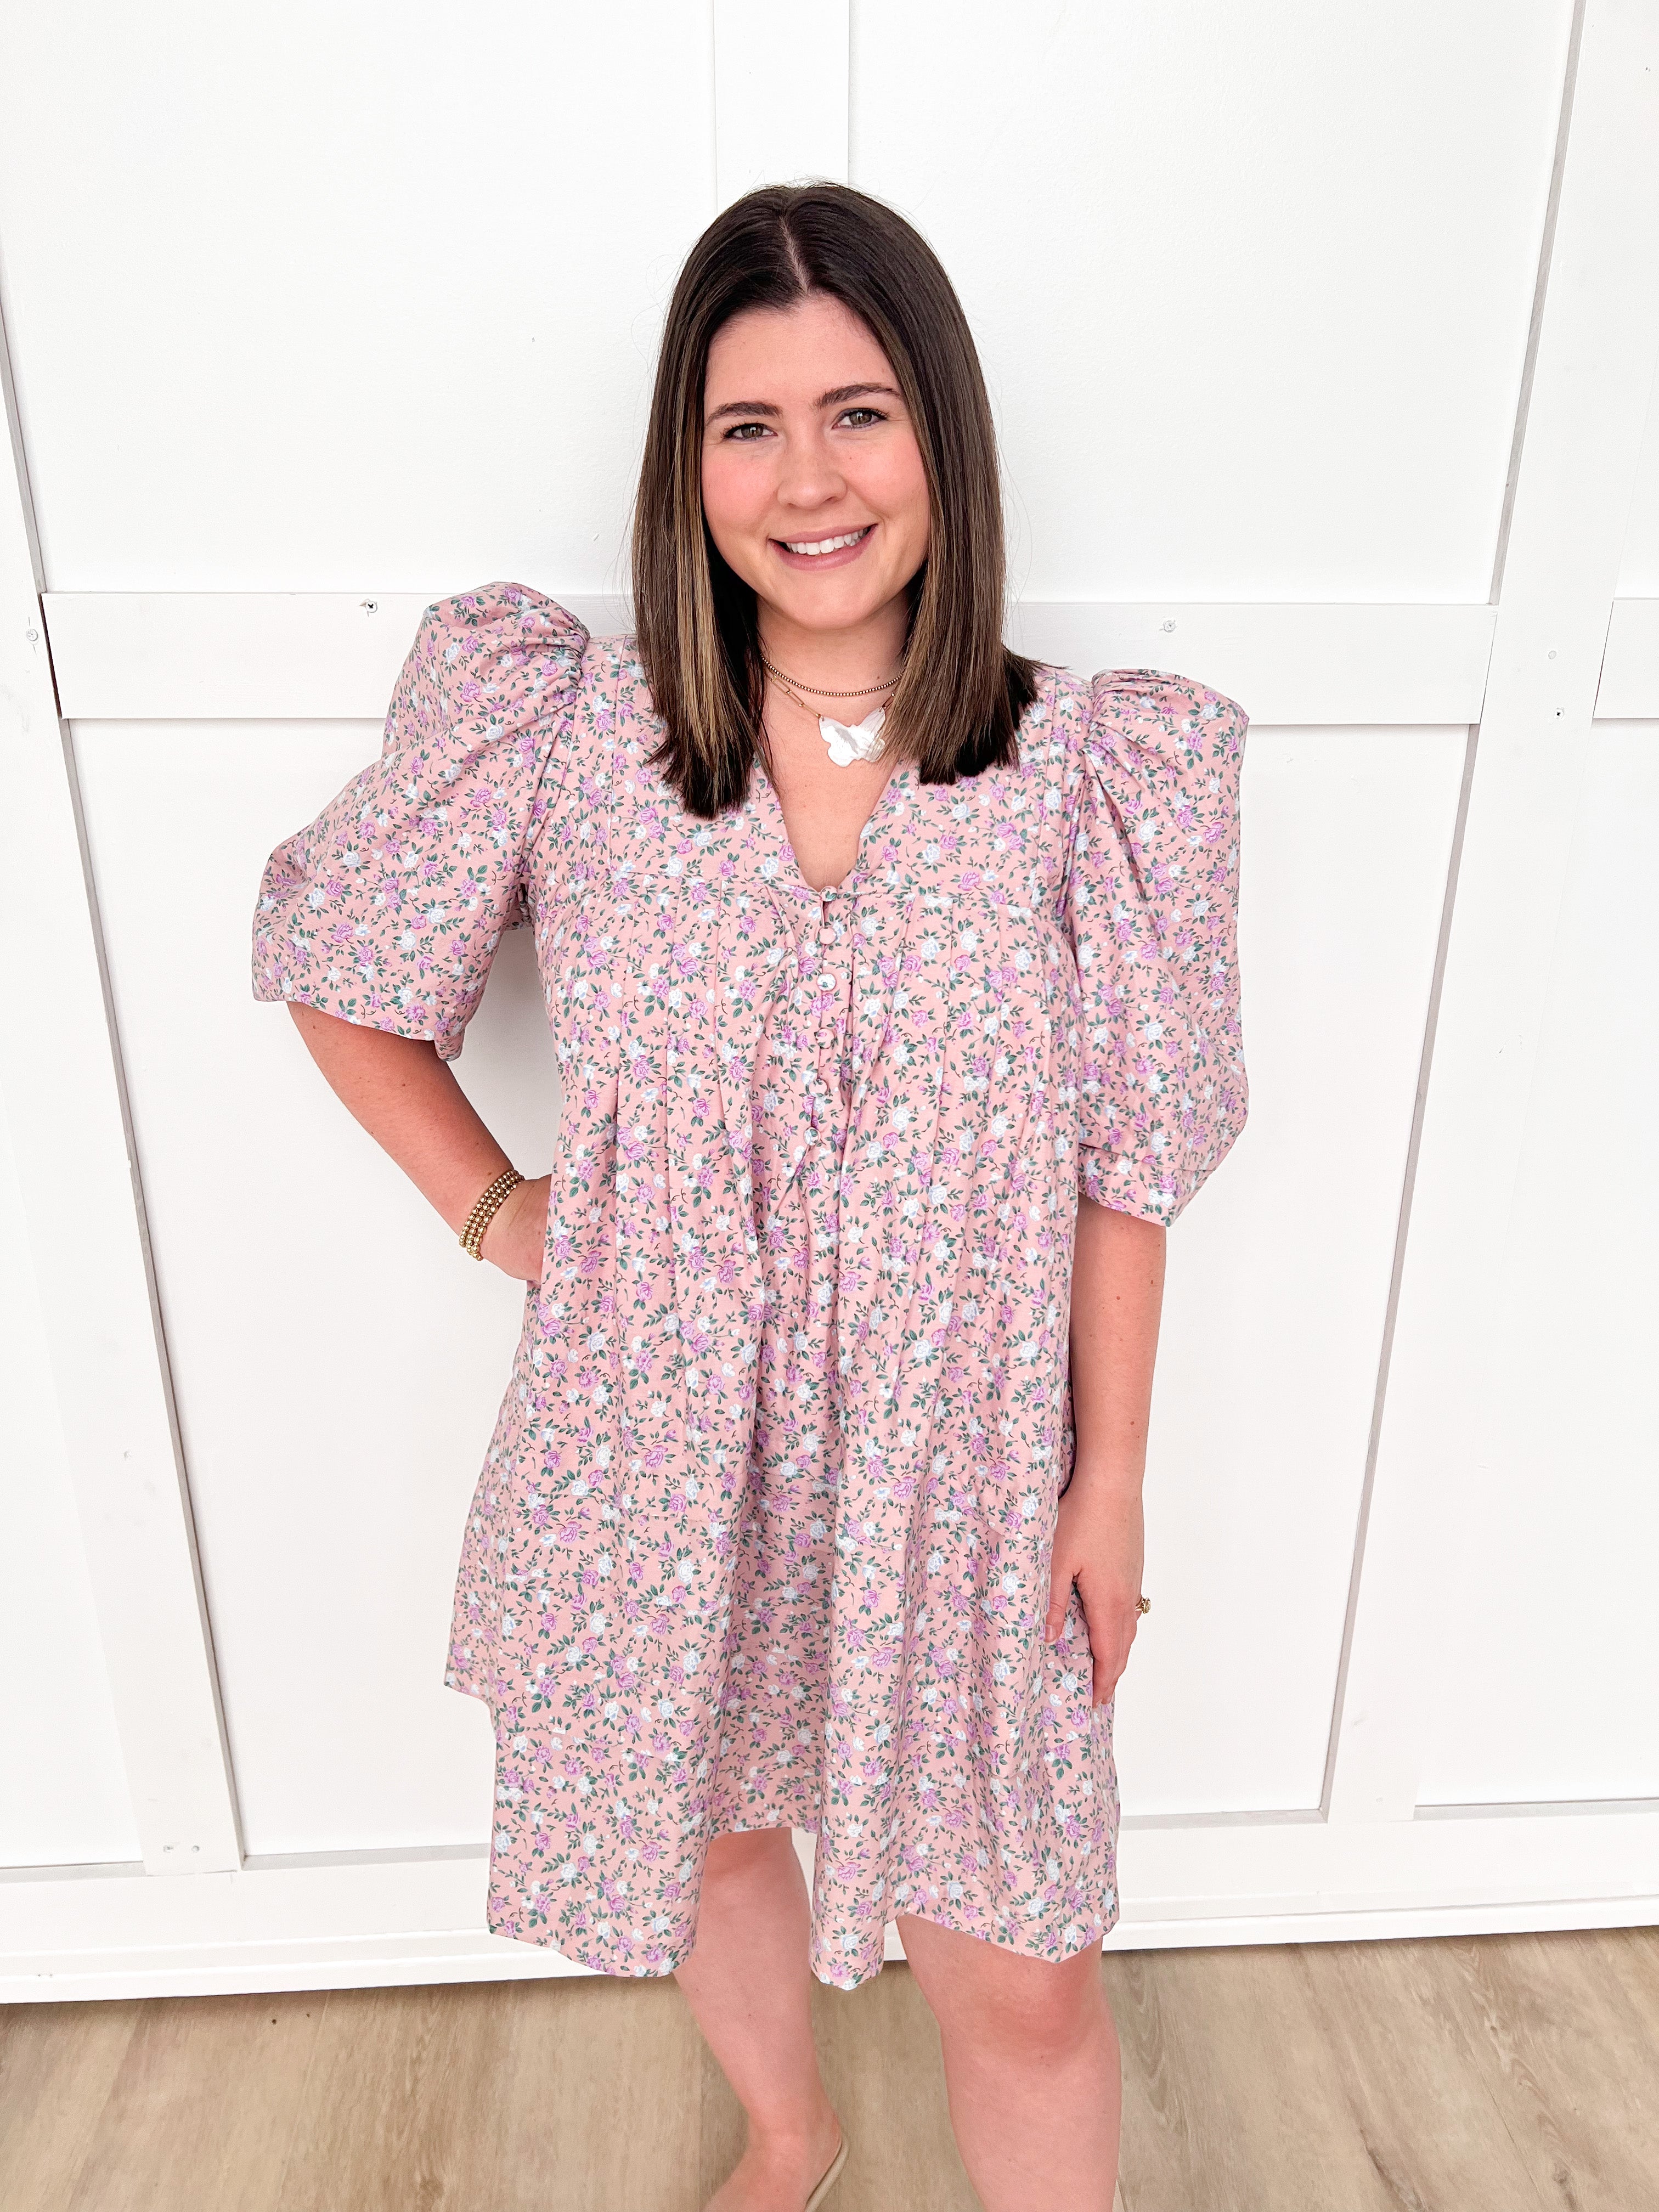 This Darling Under-$45 Smocked Dress Is Perfect For Easter